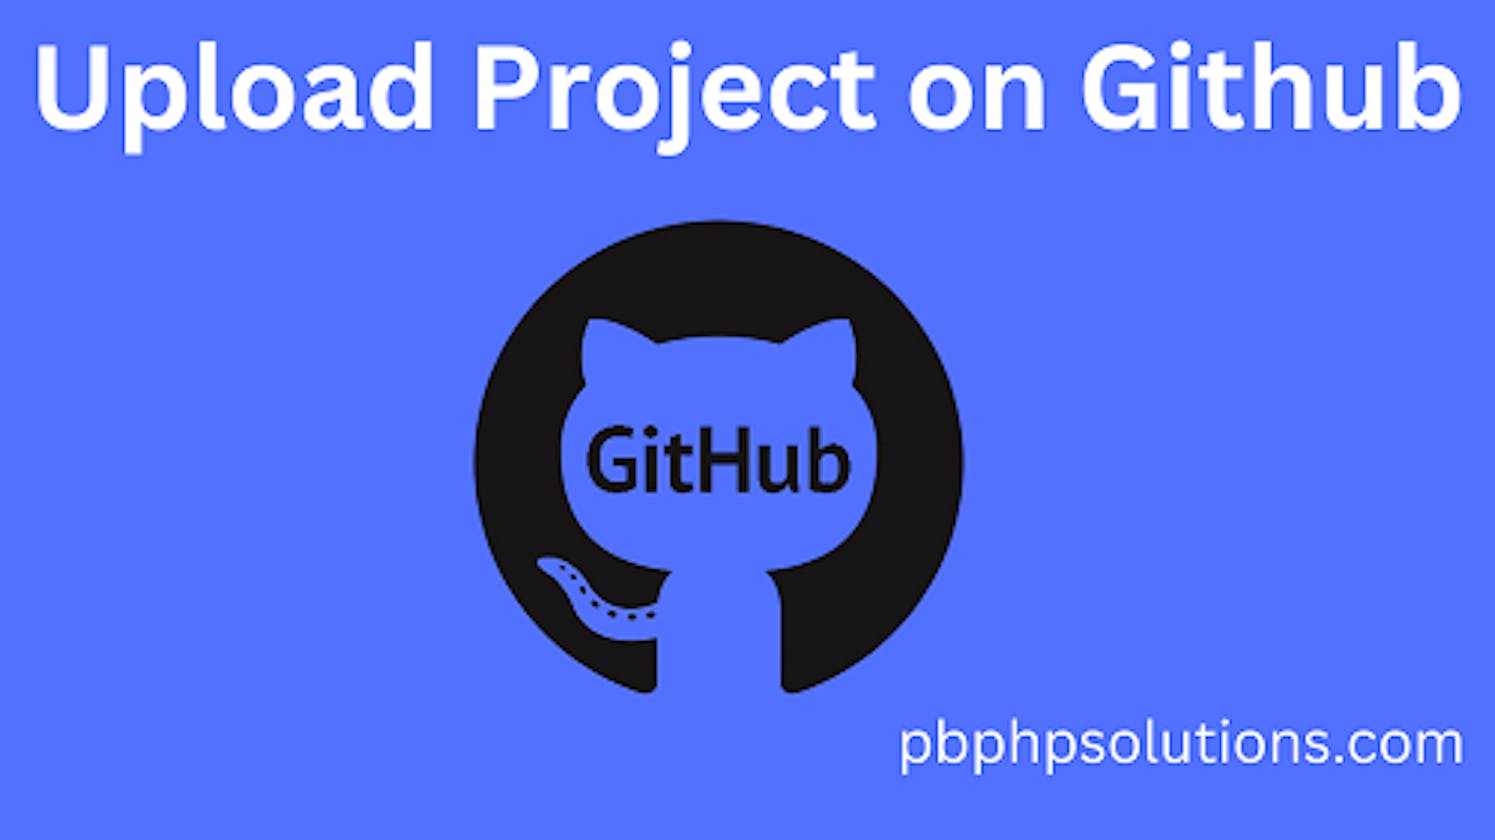 How to upload project on GitHub